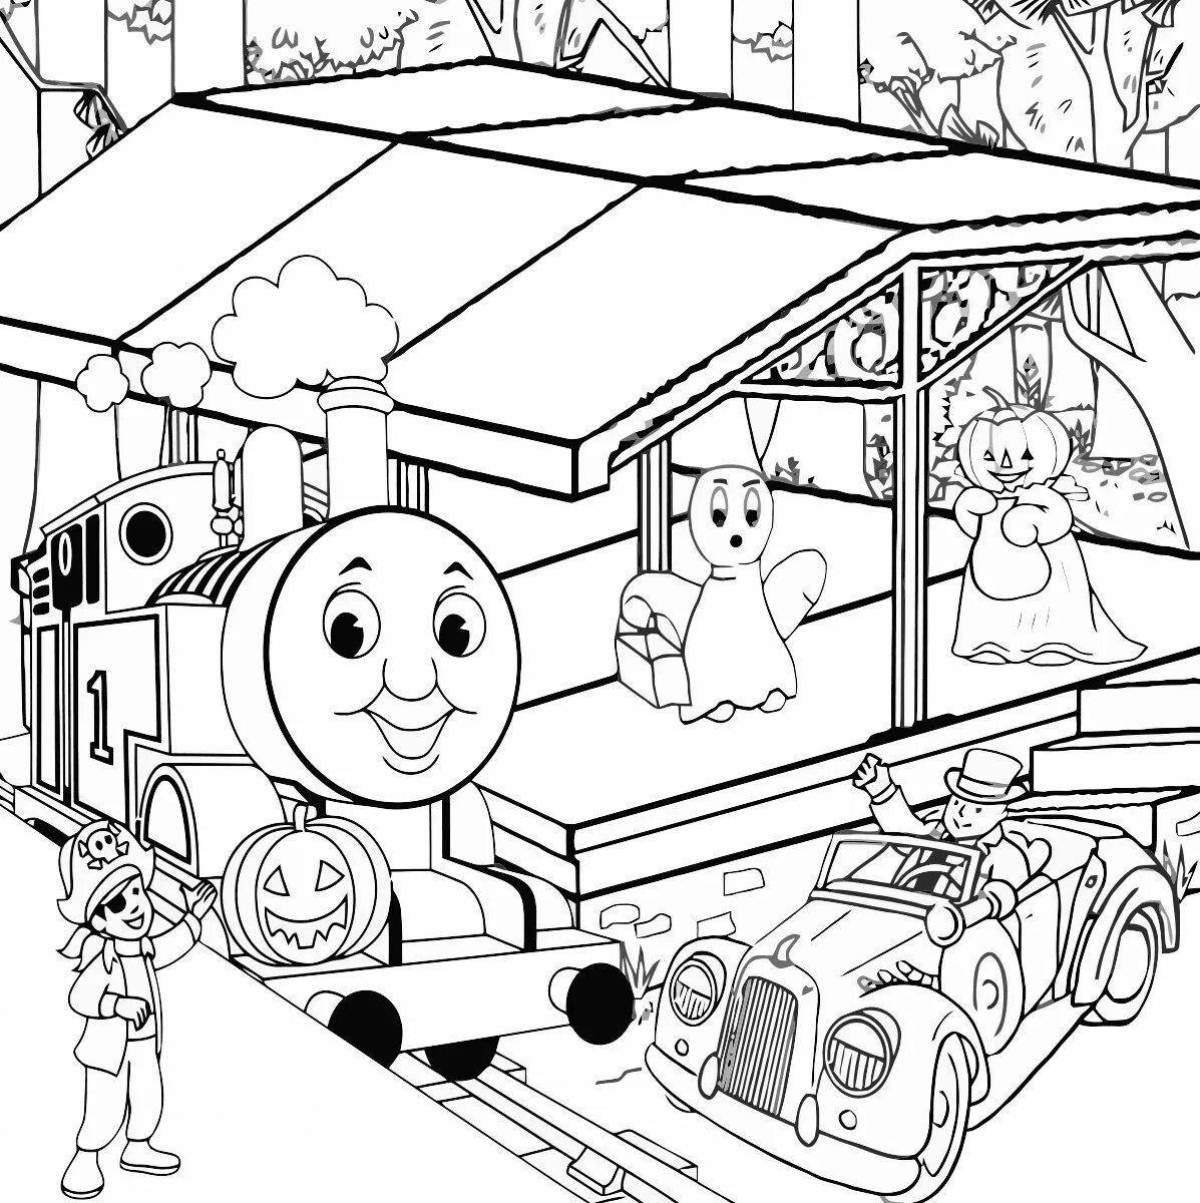 Thomas' creative coloring book for kids